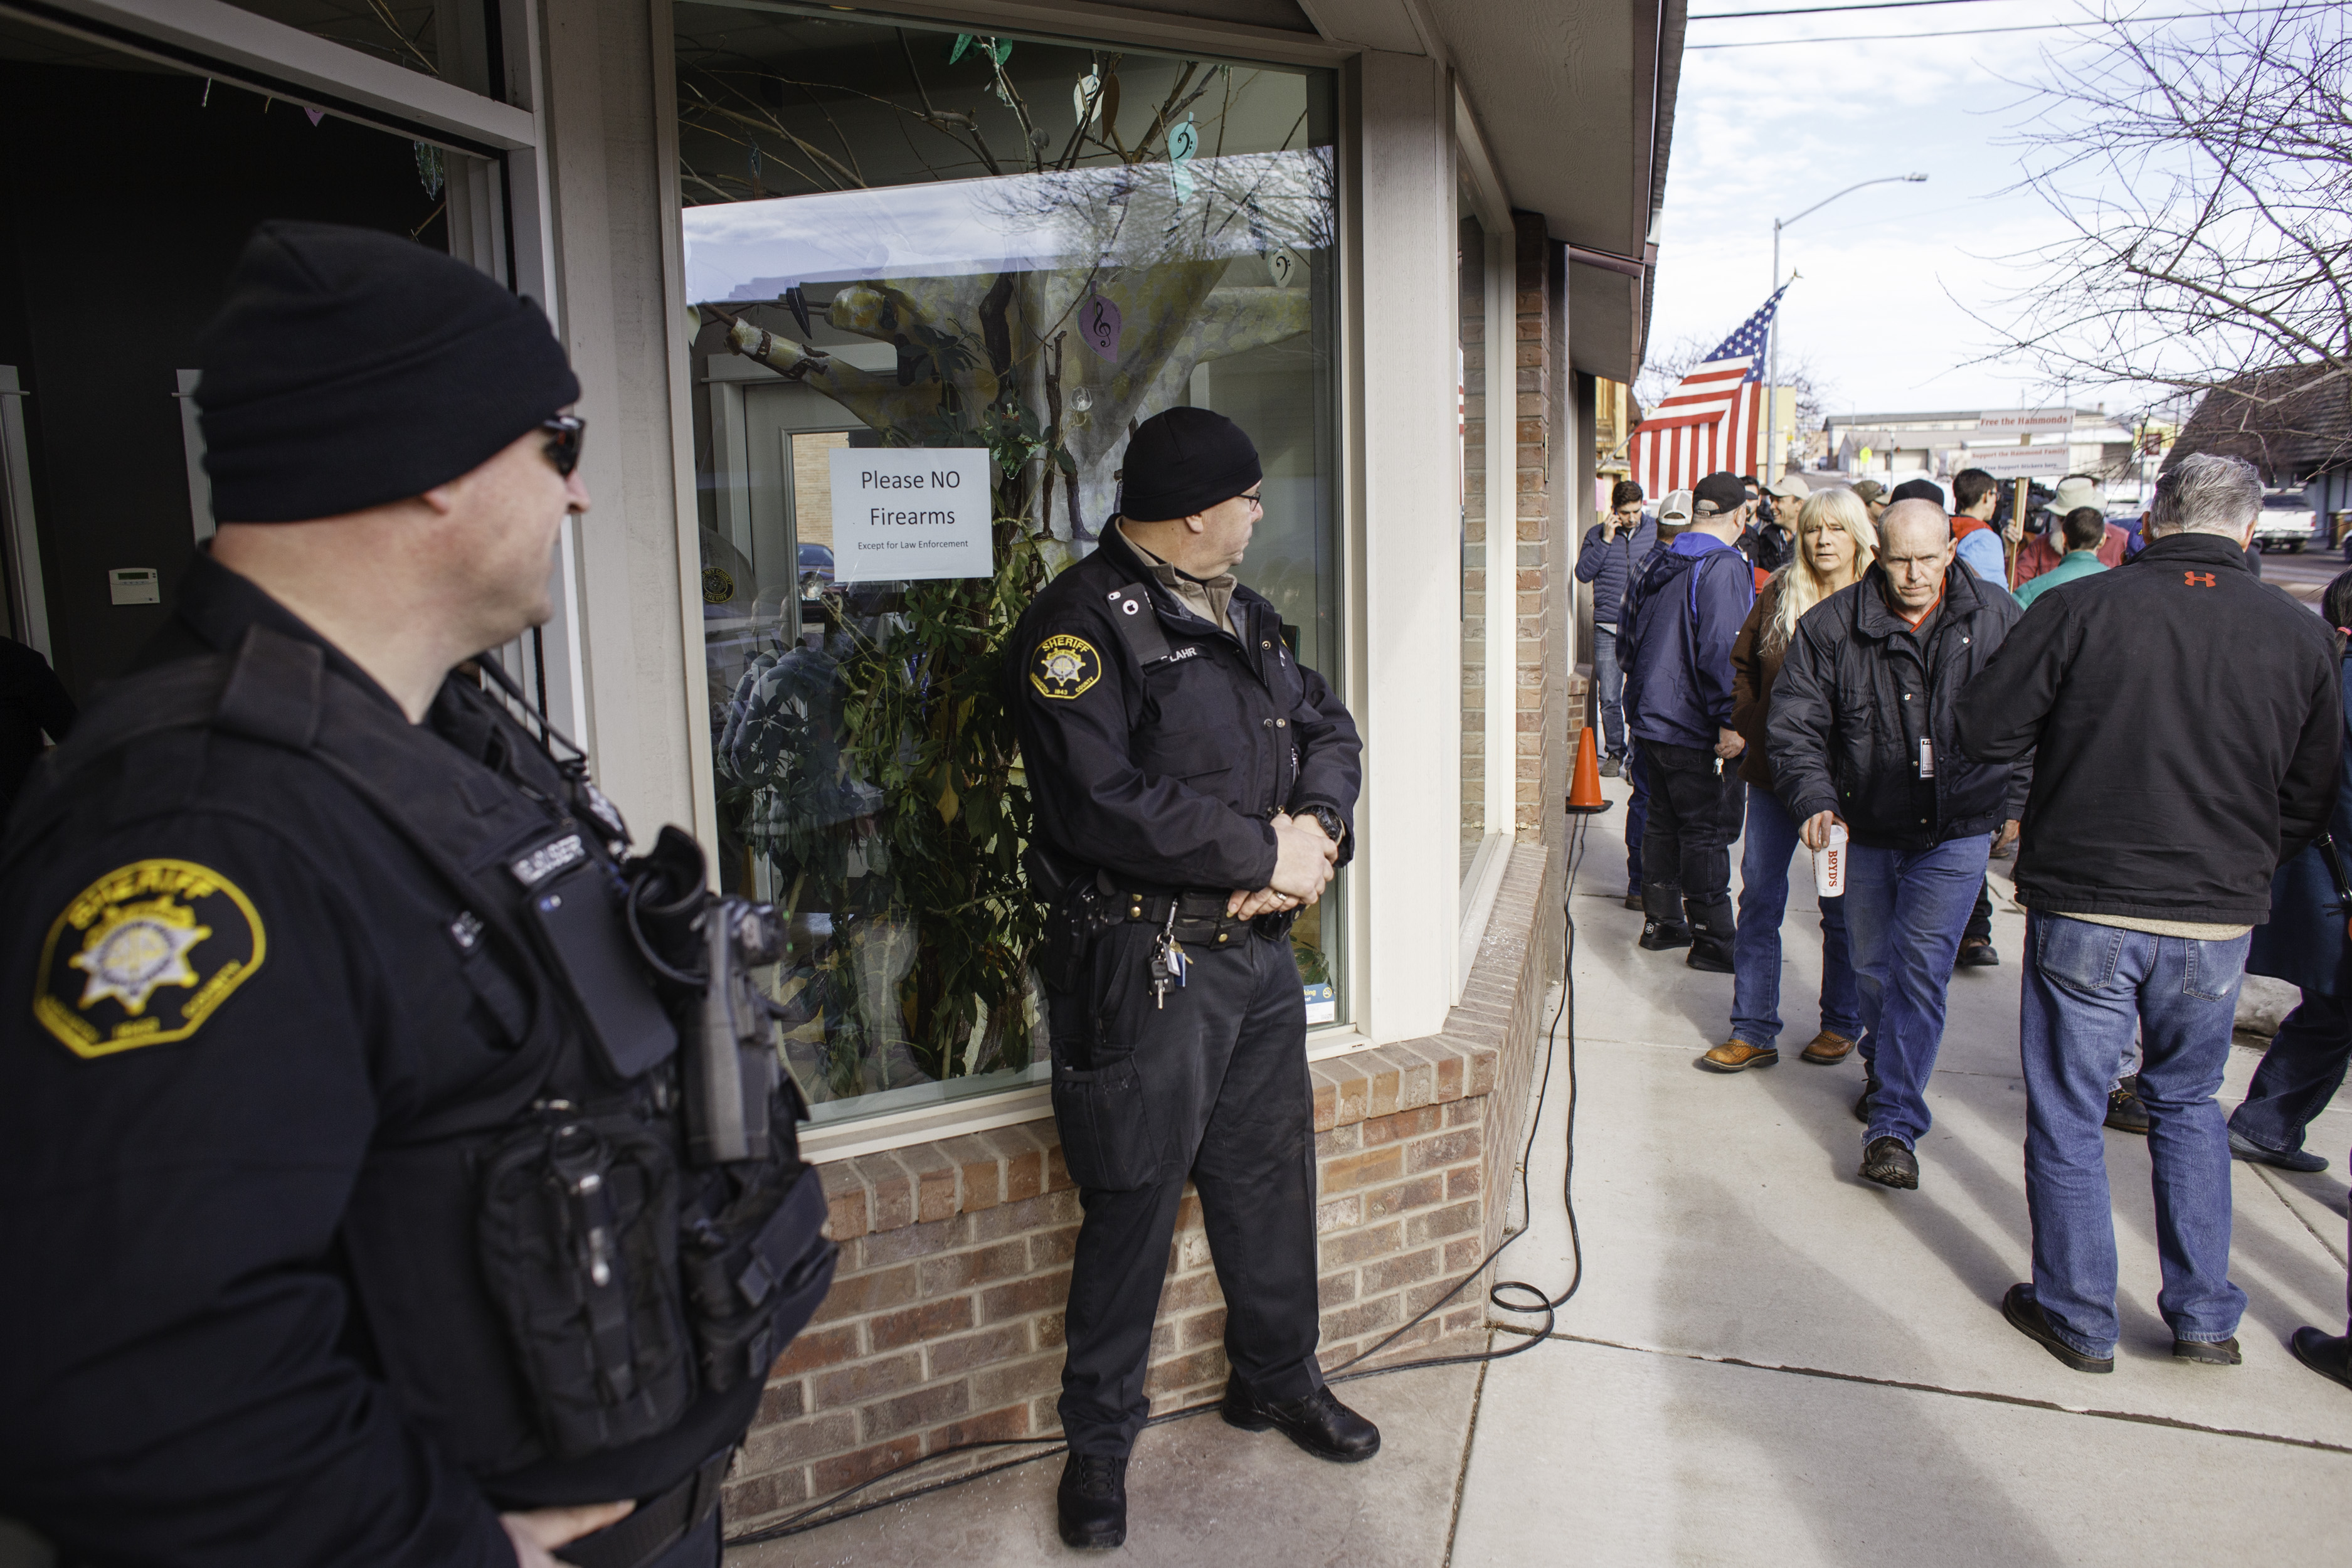 Washington County Sheriff Deputies monitor the public outside of the Harney County Chamber of Commerce where a press conference was being held in Burns, Oregon, on Jan. 27, 2016. (Rob Kerr—AFP/Getty Images)